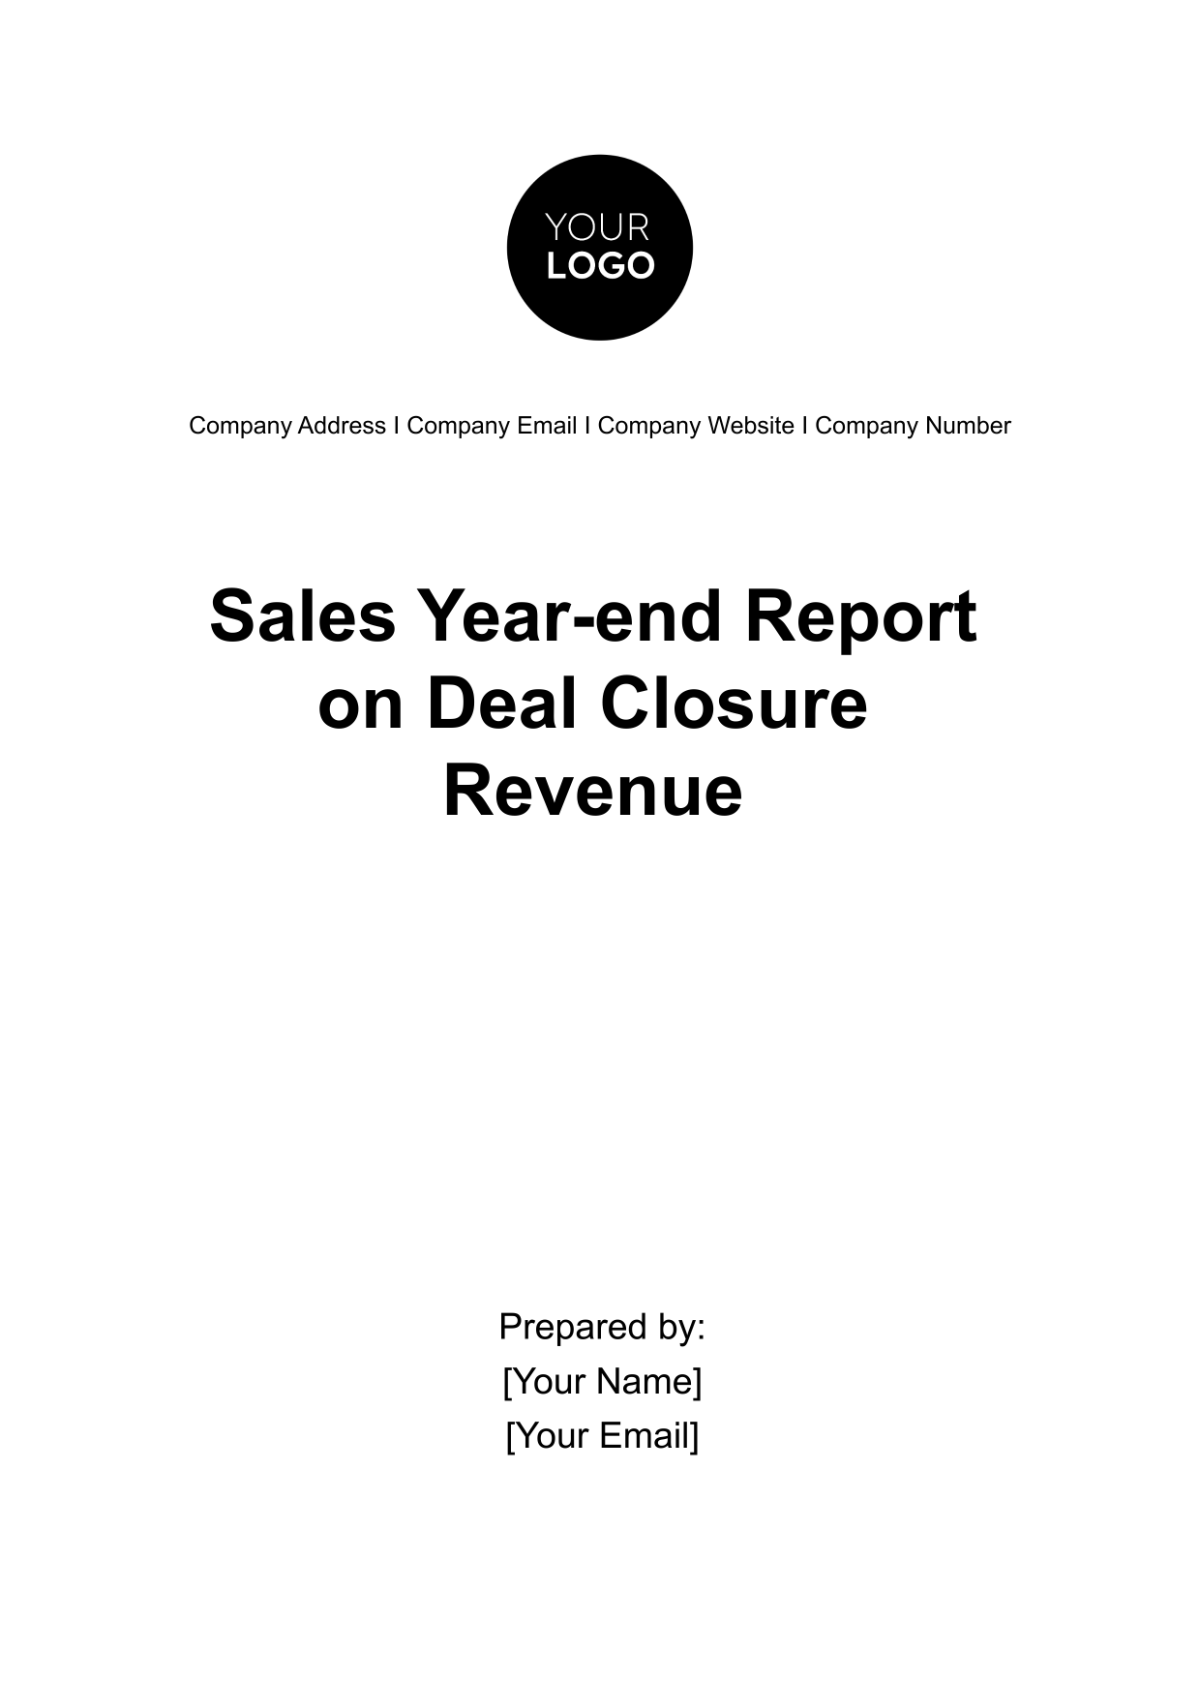 Sales Year-end Report on Deal Closure Revenue Template